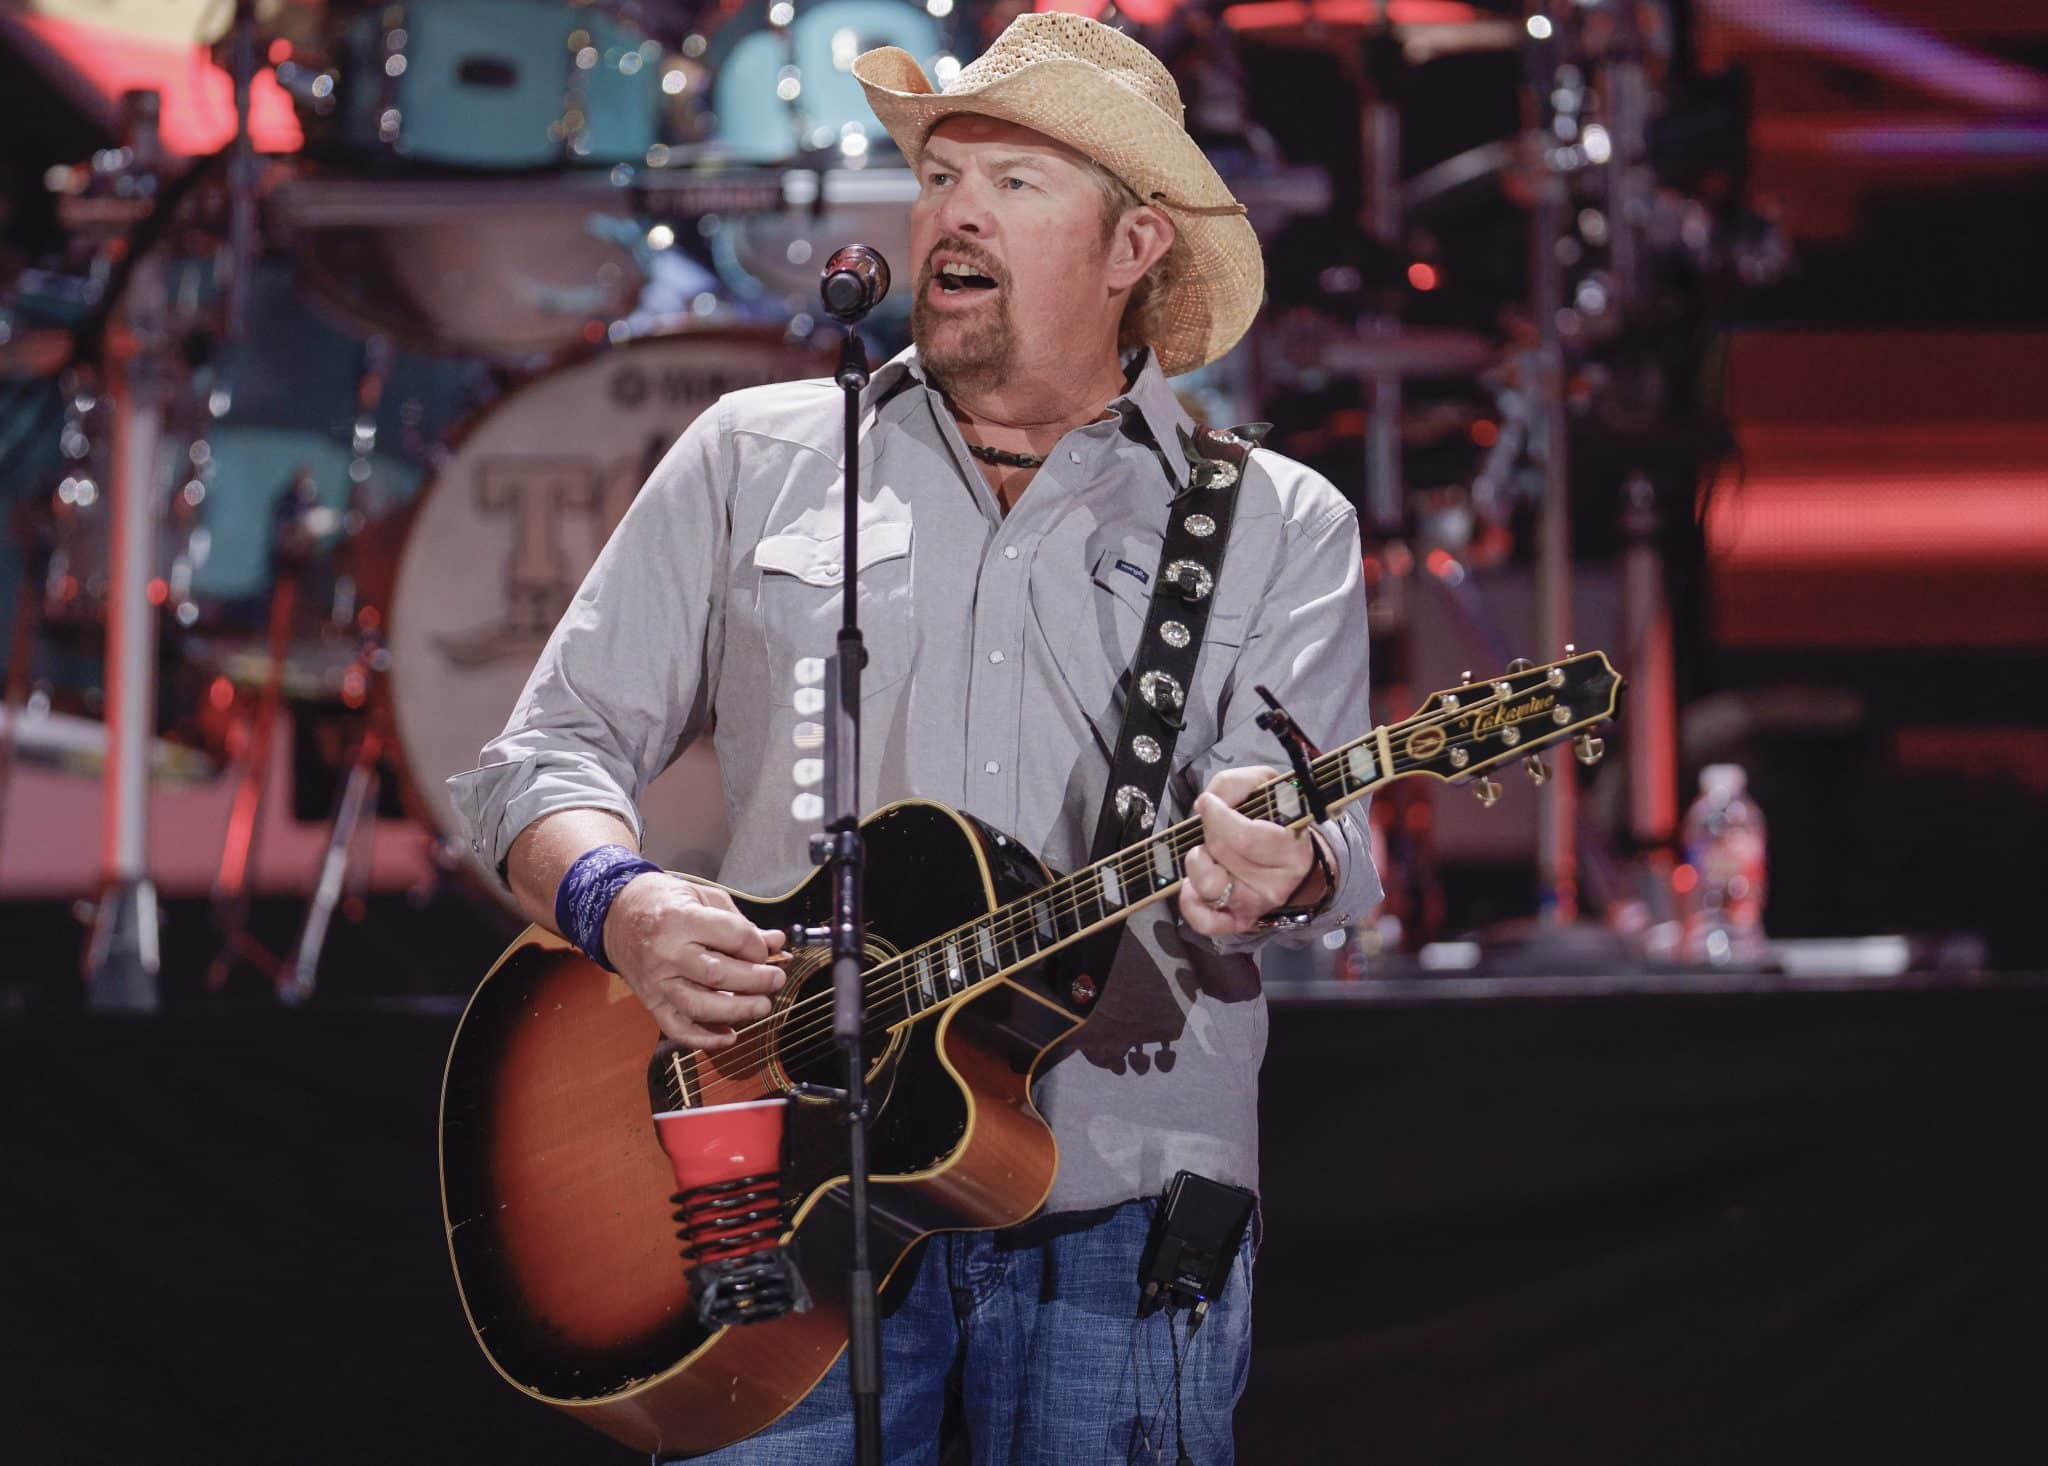 Toby Keith performs during the 2021 iHeartCountry Festival at Frank Irwin Center on October 30, 2021 in Austin, Texas. (Photo by Michael Hickey/Getty Images)